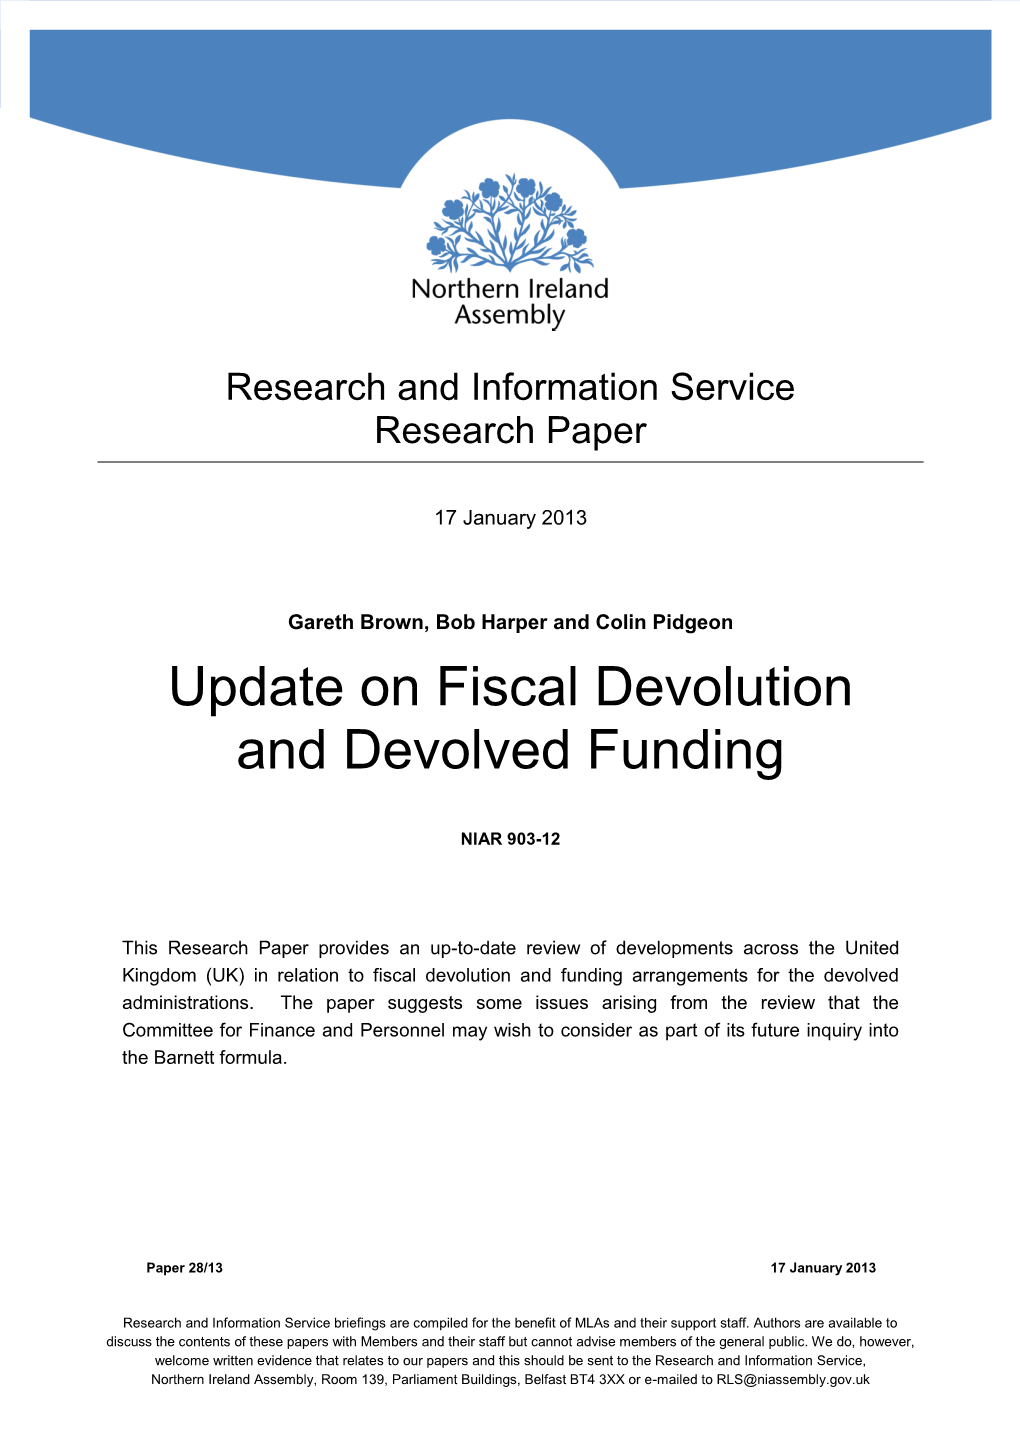 Update on Fiscal Devolution and Devolved Funding